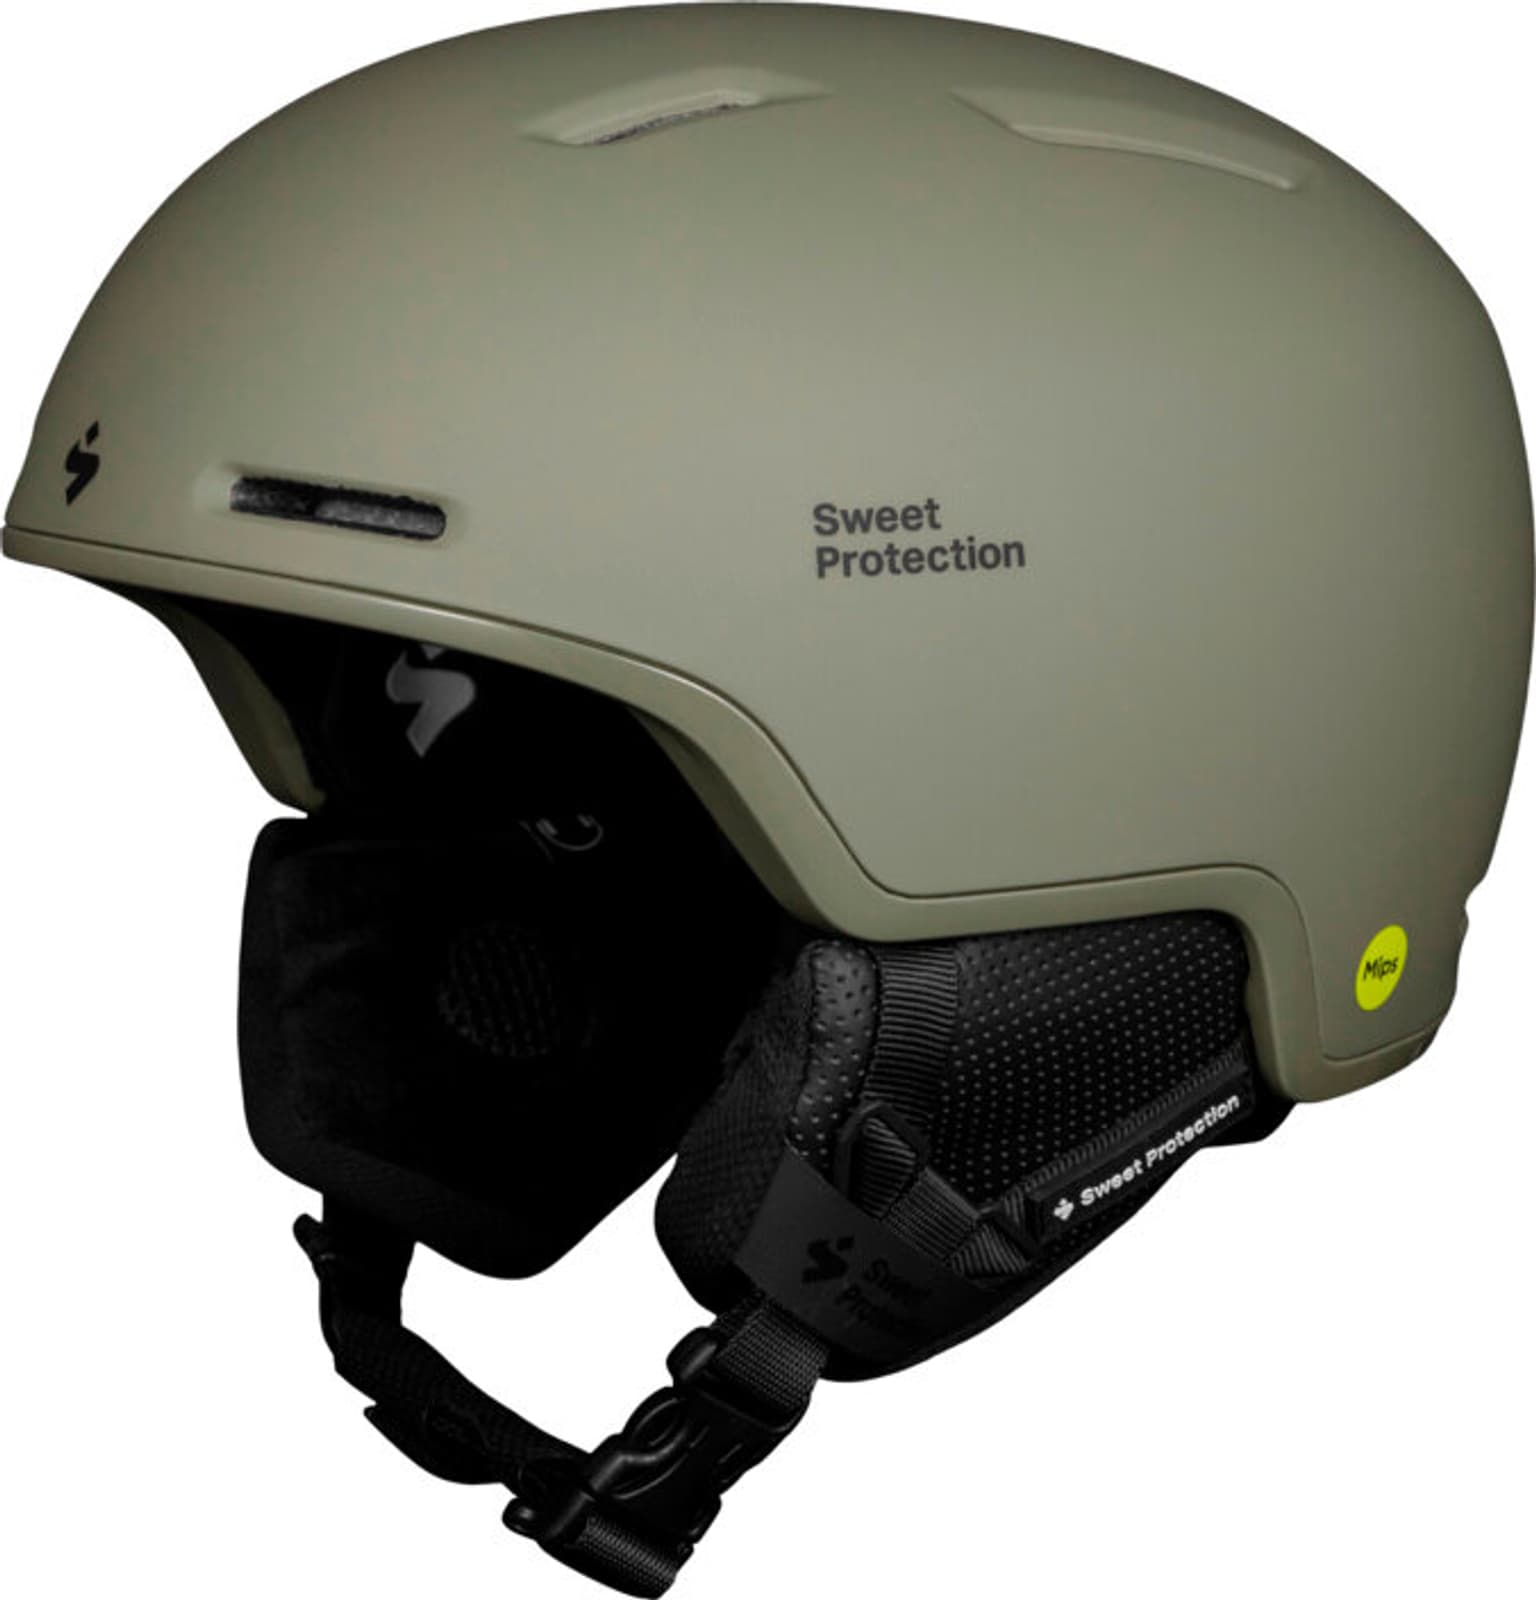 Sweet Protection Sweet Protection Looper Mips Skihelm olive 1